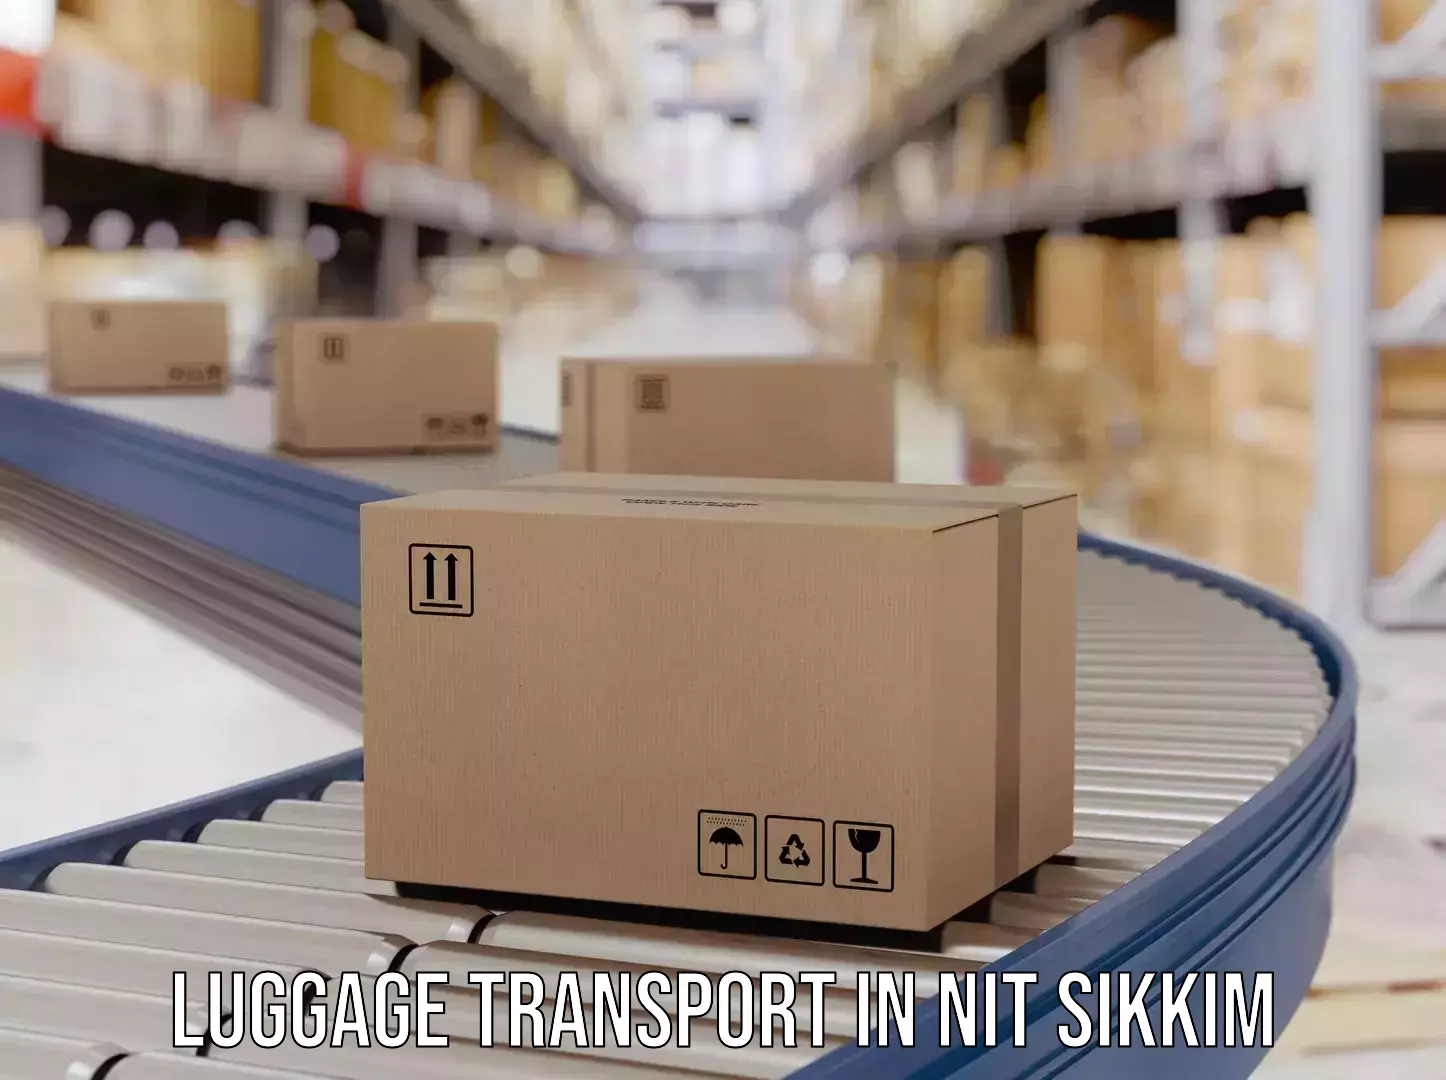 Domestic luggage transport in NIT Sikkim